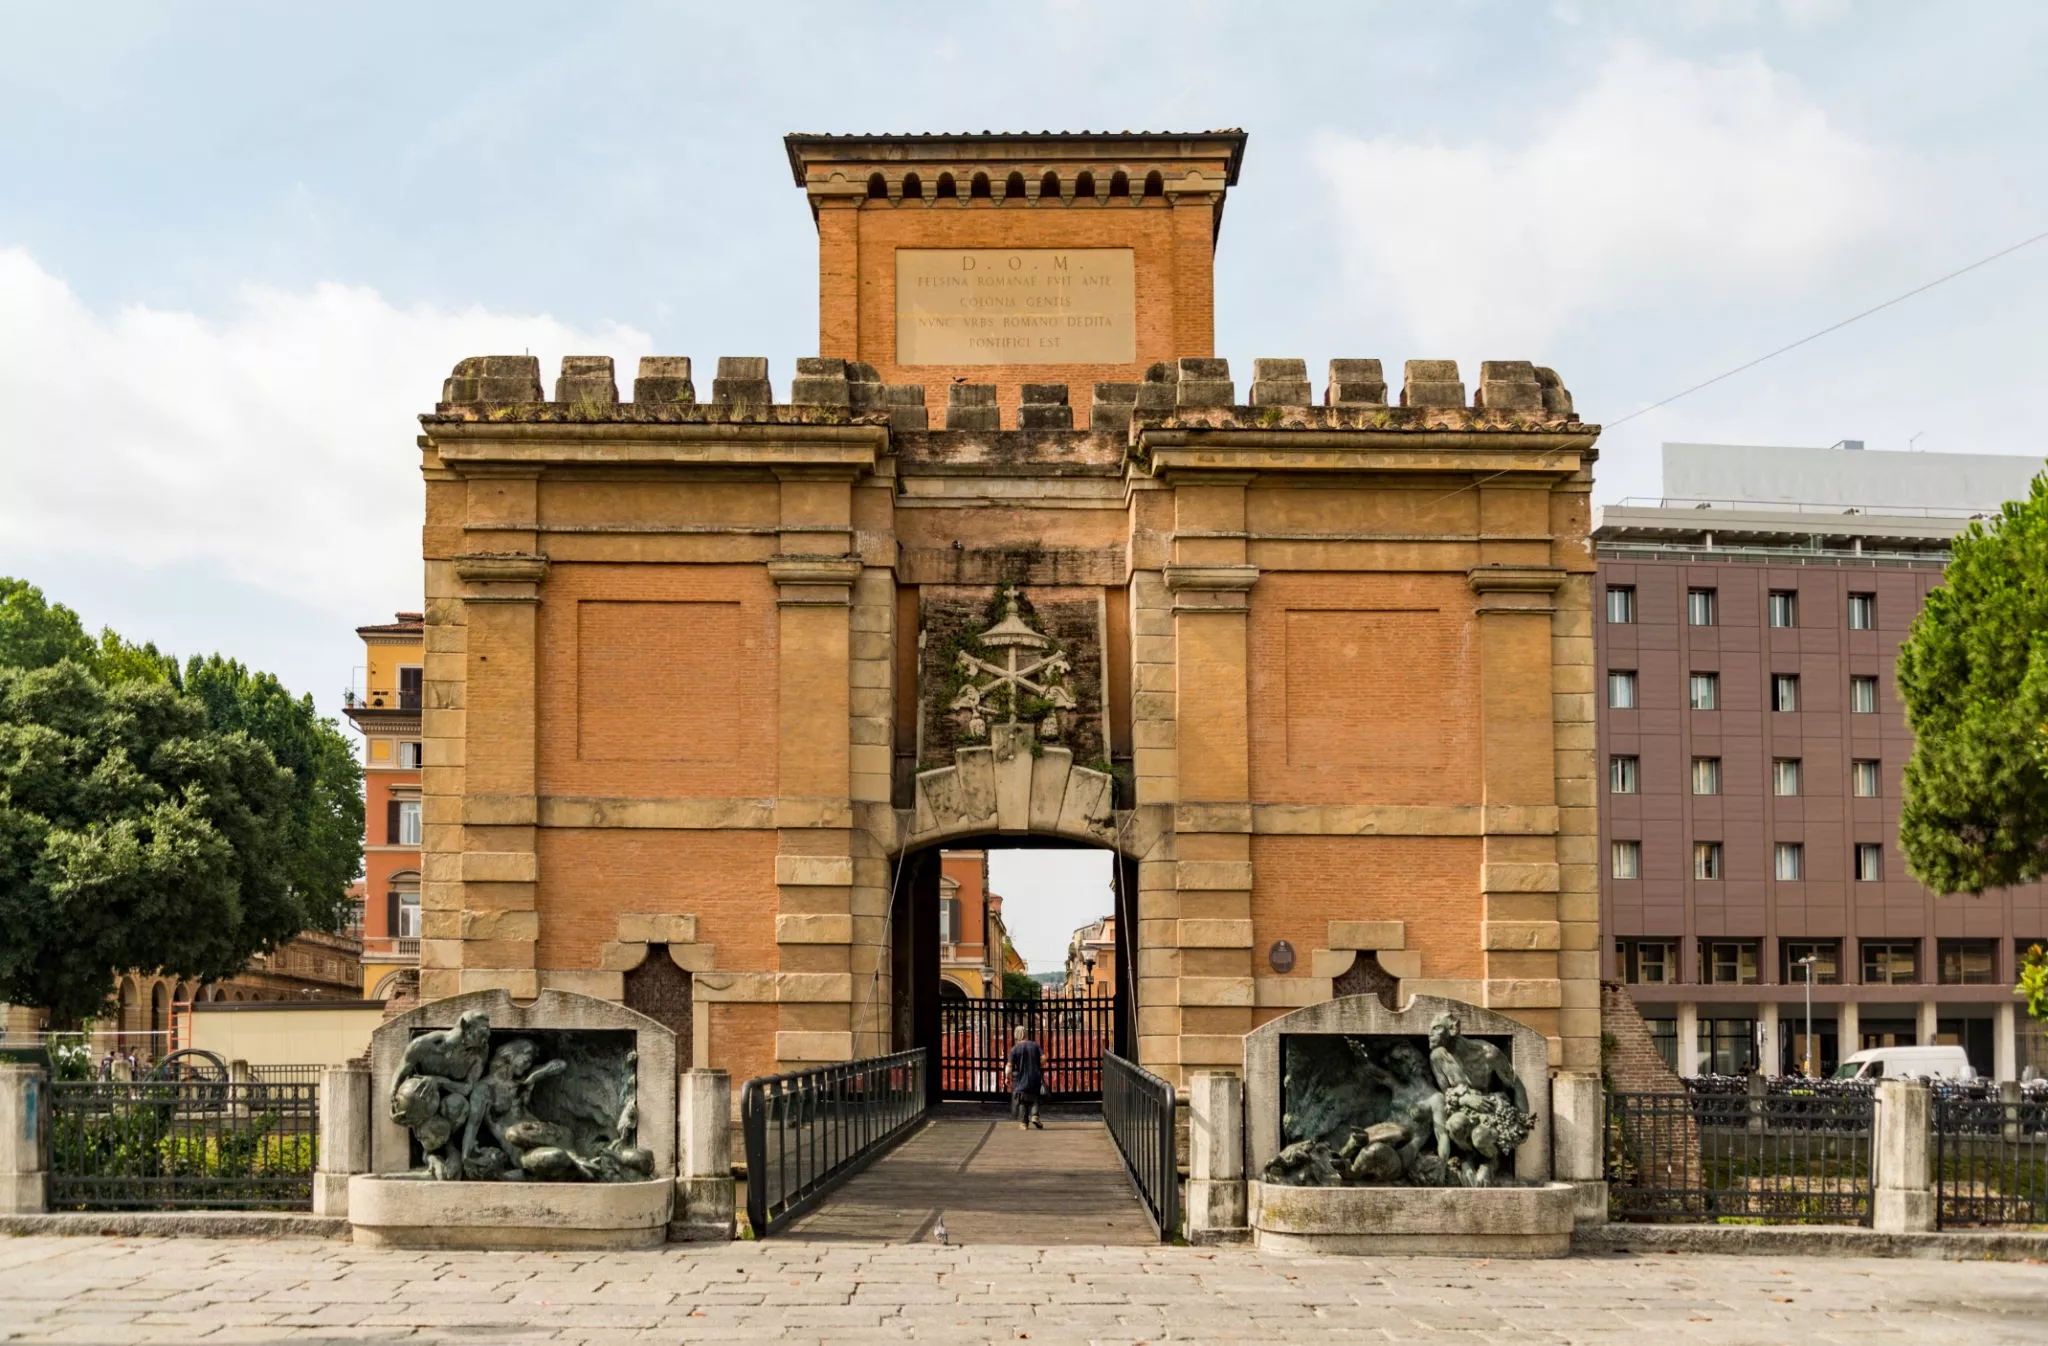 Galliera Gate in Italy, Europe | Architecture - Rated 3.4